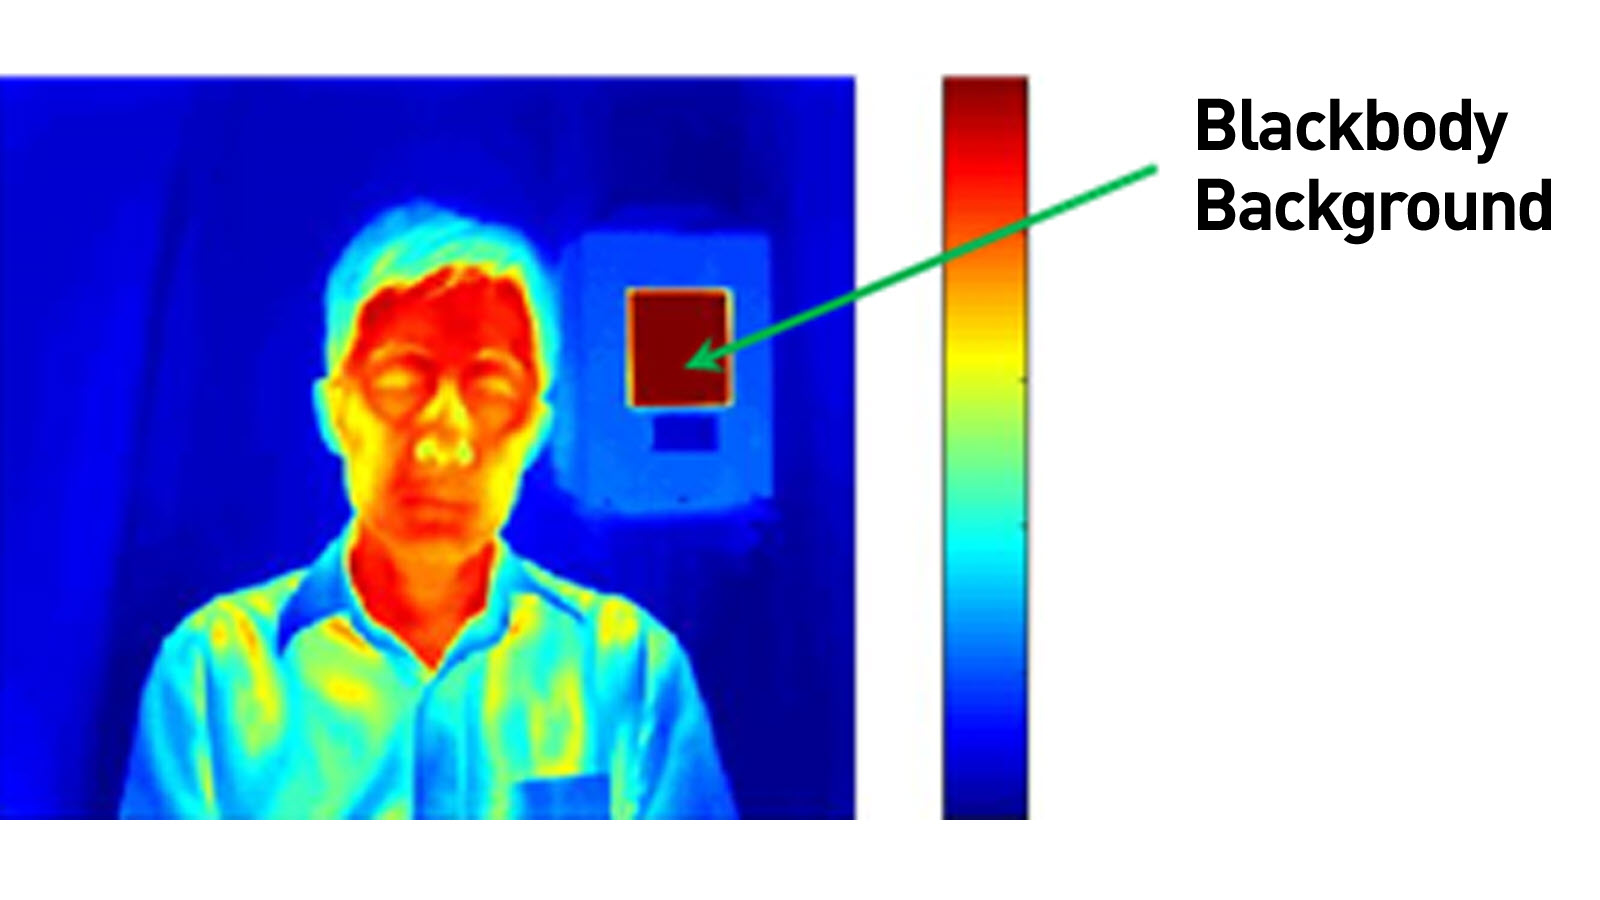 Picture of the infrared thermal image of a man standing in front of a plain wall with a small square blackbody background on the wall. His face is shown in a dark red color indicating a higher skin surface temperature than his clothing that is shown in blue and yellow. The blackbody background is shown in very dark brown indicating minimized reflection of infrared radiation. A temperature range scale bar to the right of the picture shows a color range from dark brown through the color spectrum to dark blue.